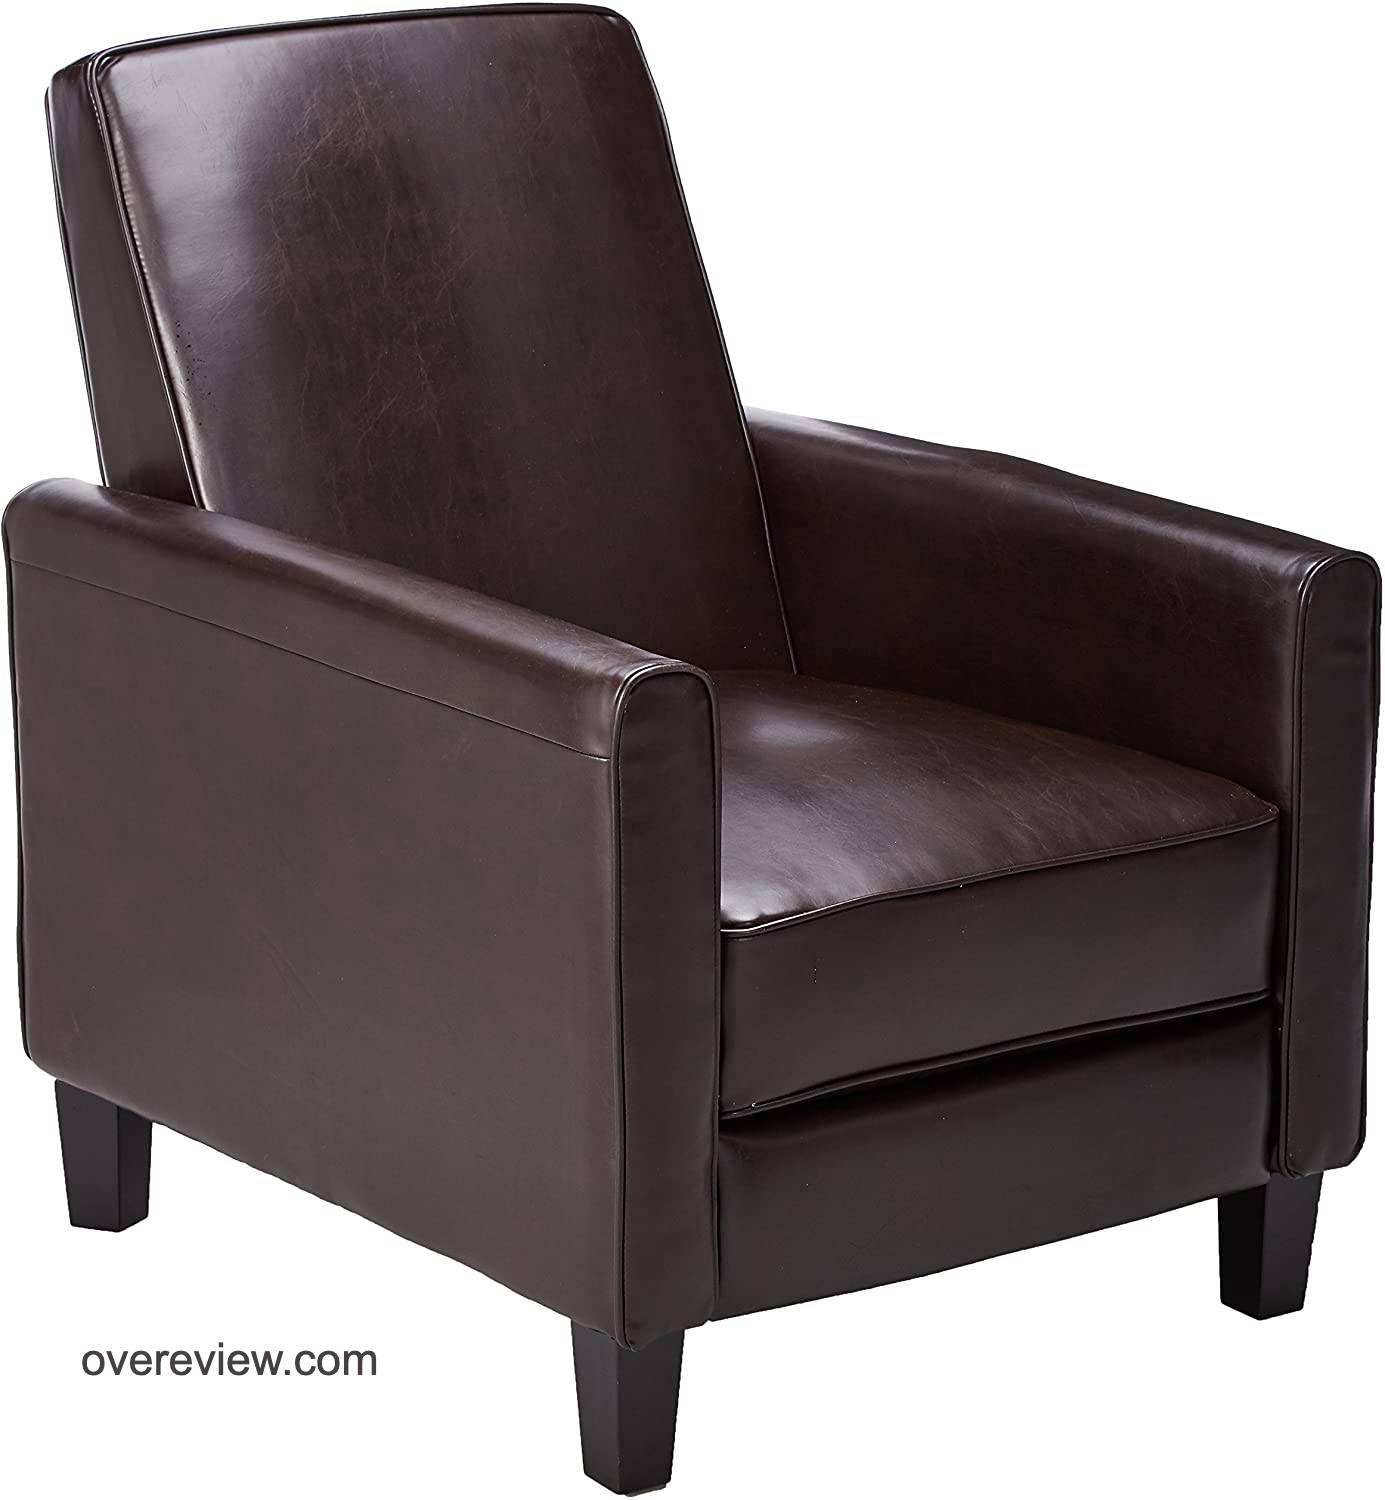 Best 15 Most Comfortable Recliners {Buying Guide} Reviews - [year] 1